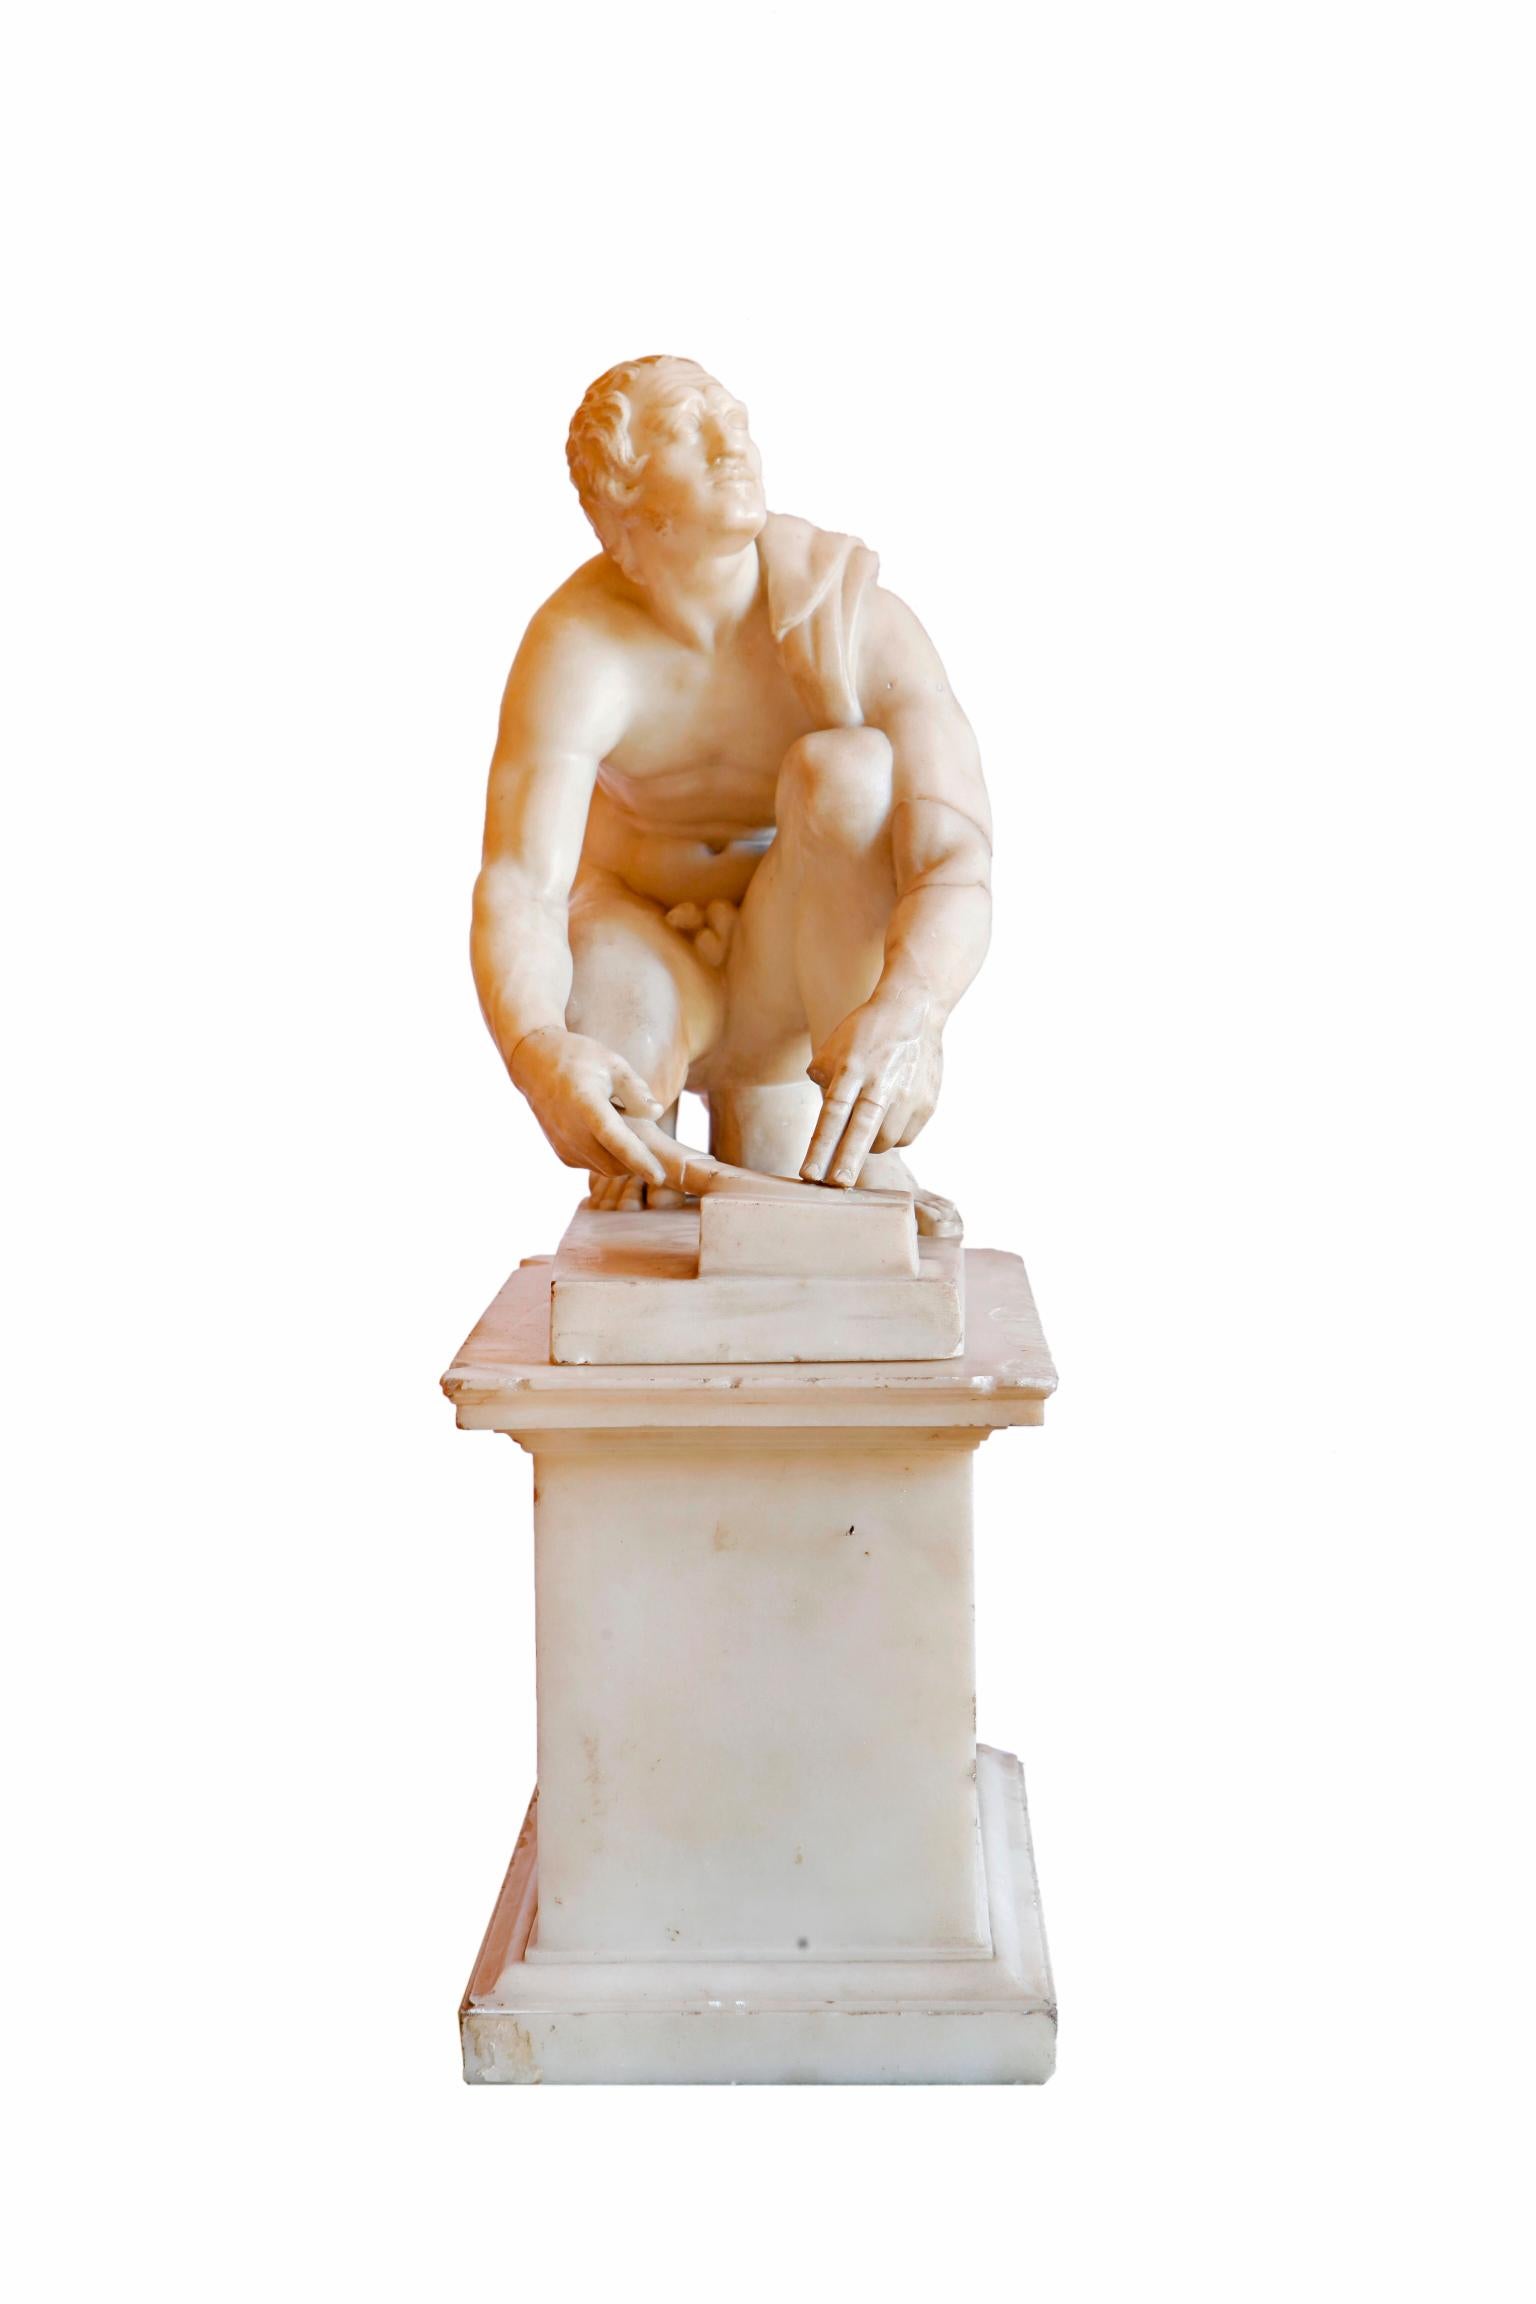 Italian 19th Century after the Antique White Marble Figure of the 